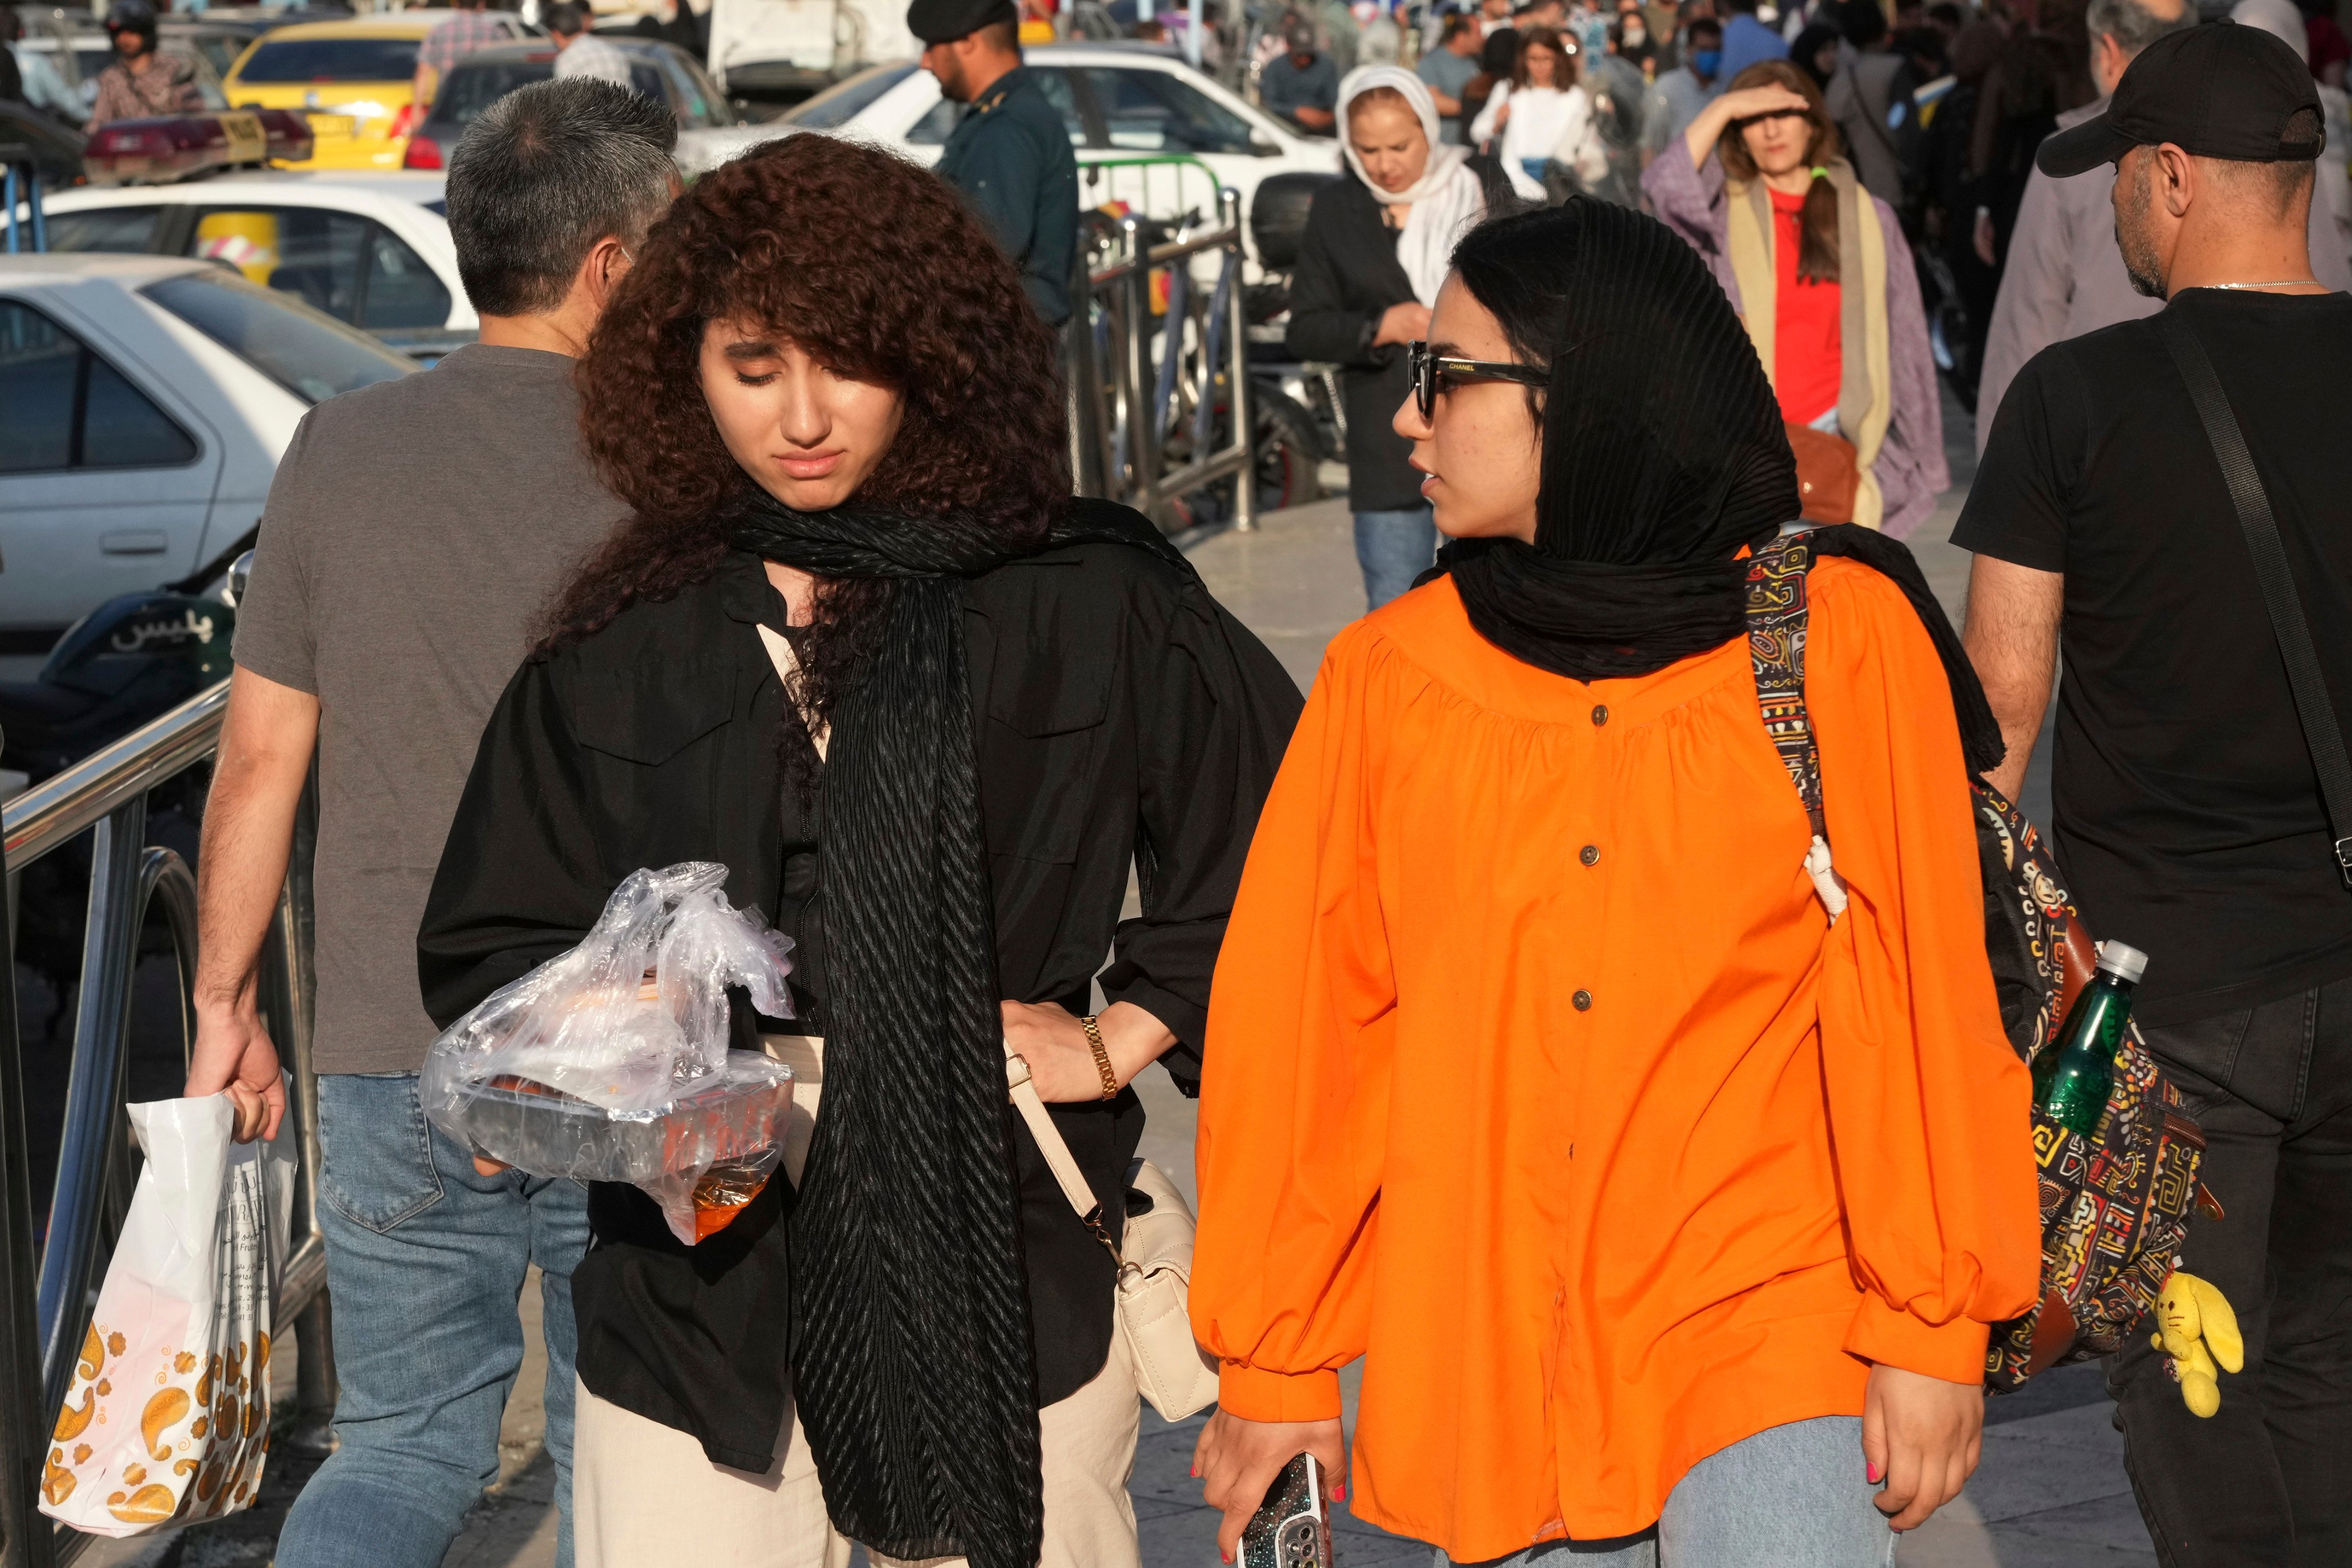 Authorities have made legal threats and closed down some businesses serving women not wearing the hijab. Photo: AP